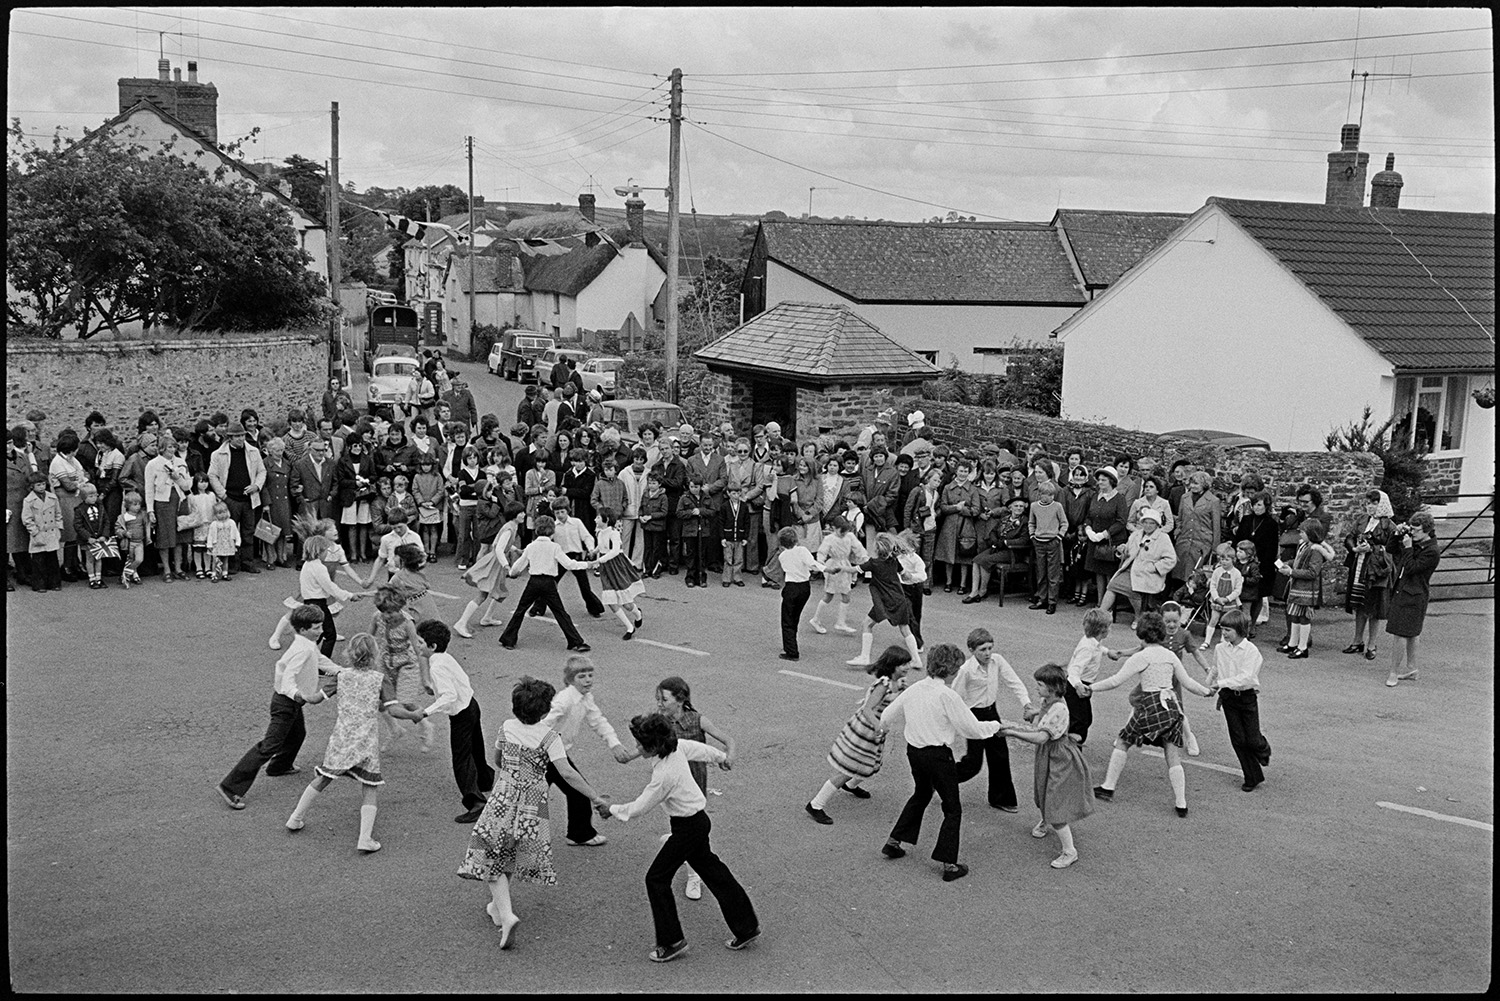 Children dancing in square, Jubilee Day. 
[Children performing a dance in Dolton village square on the Silver Jubilee of Queen Elizabeth II. A crowd of people, stood in front of a bus shelter, are watching them. The street in the background is decorated with flags.]